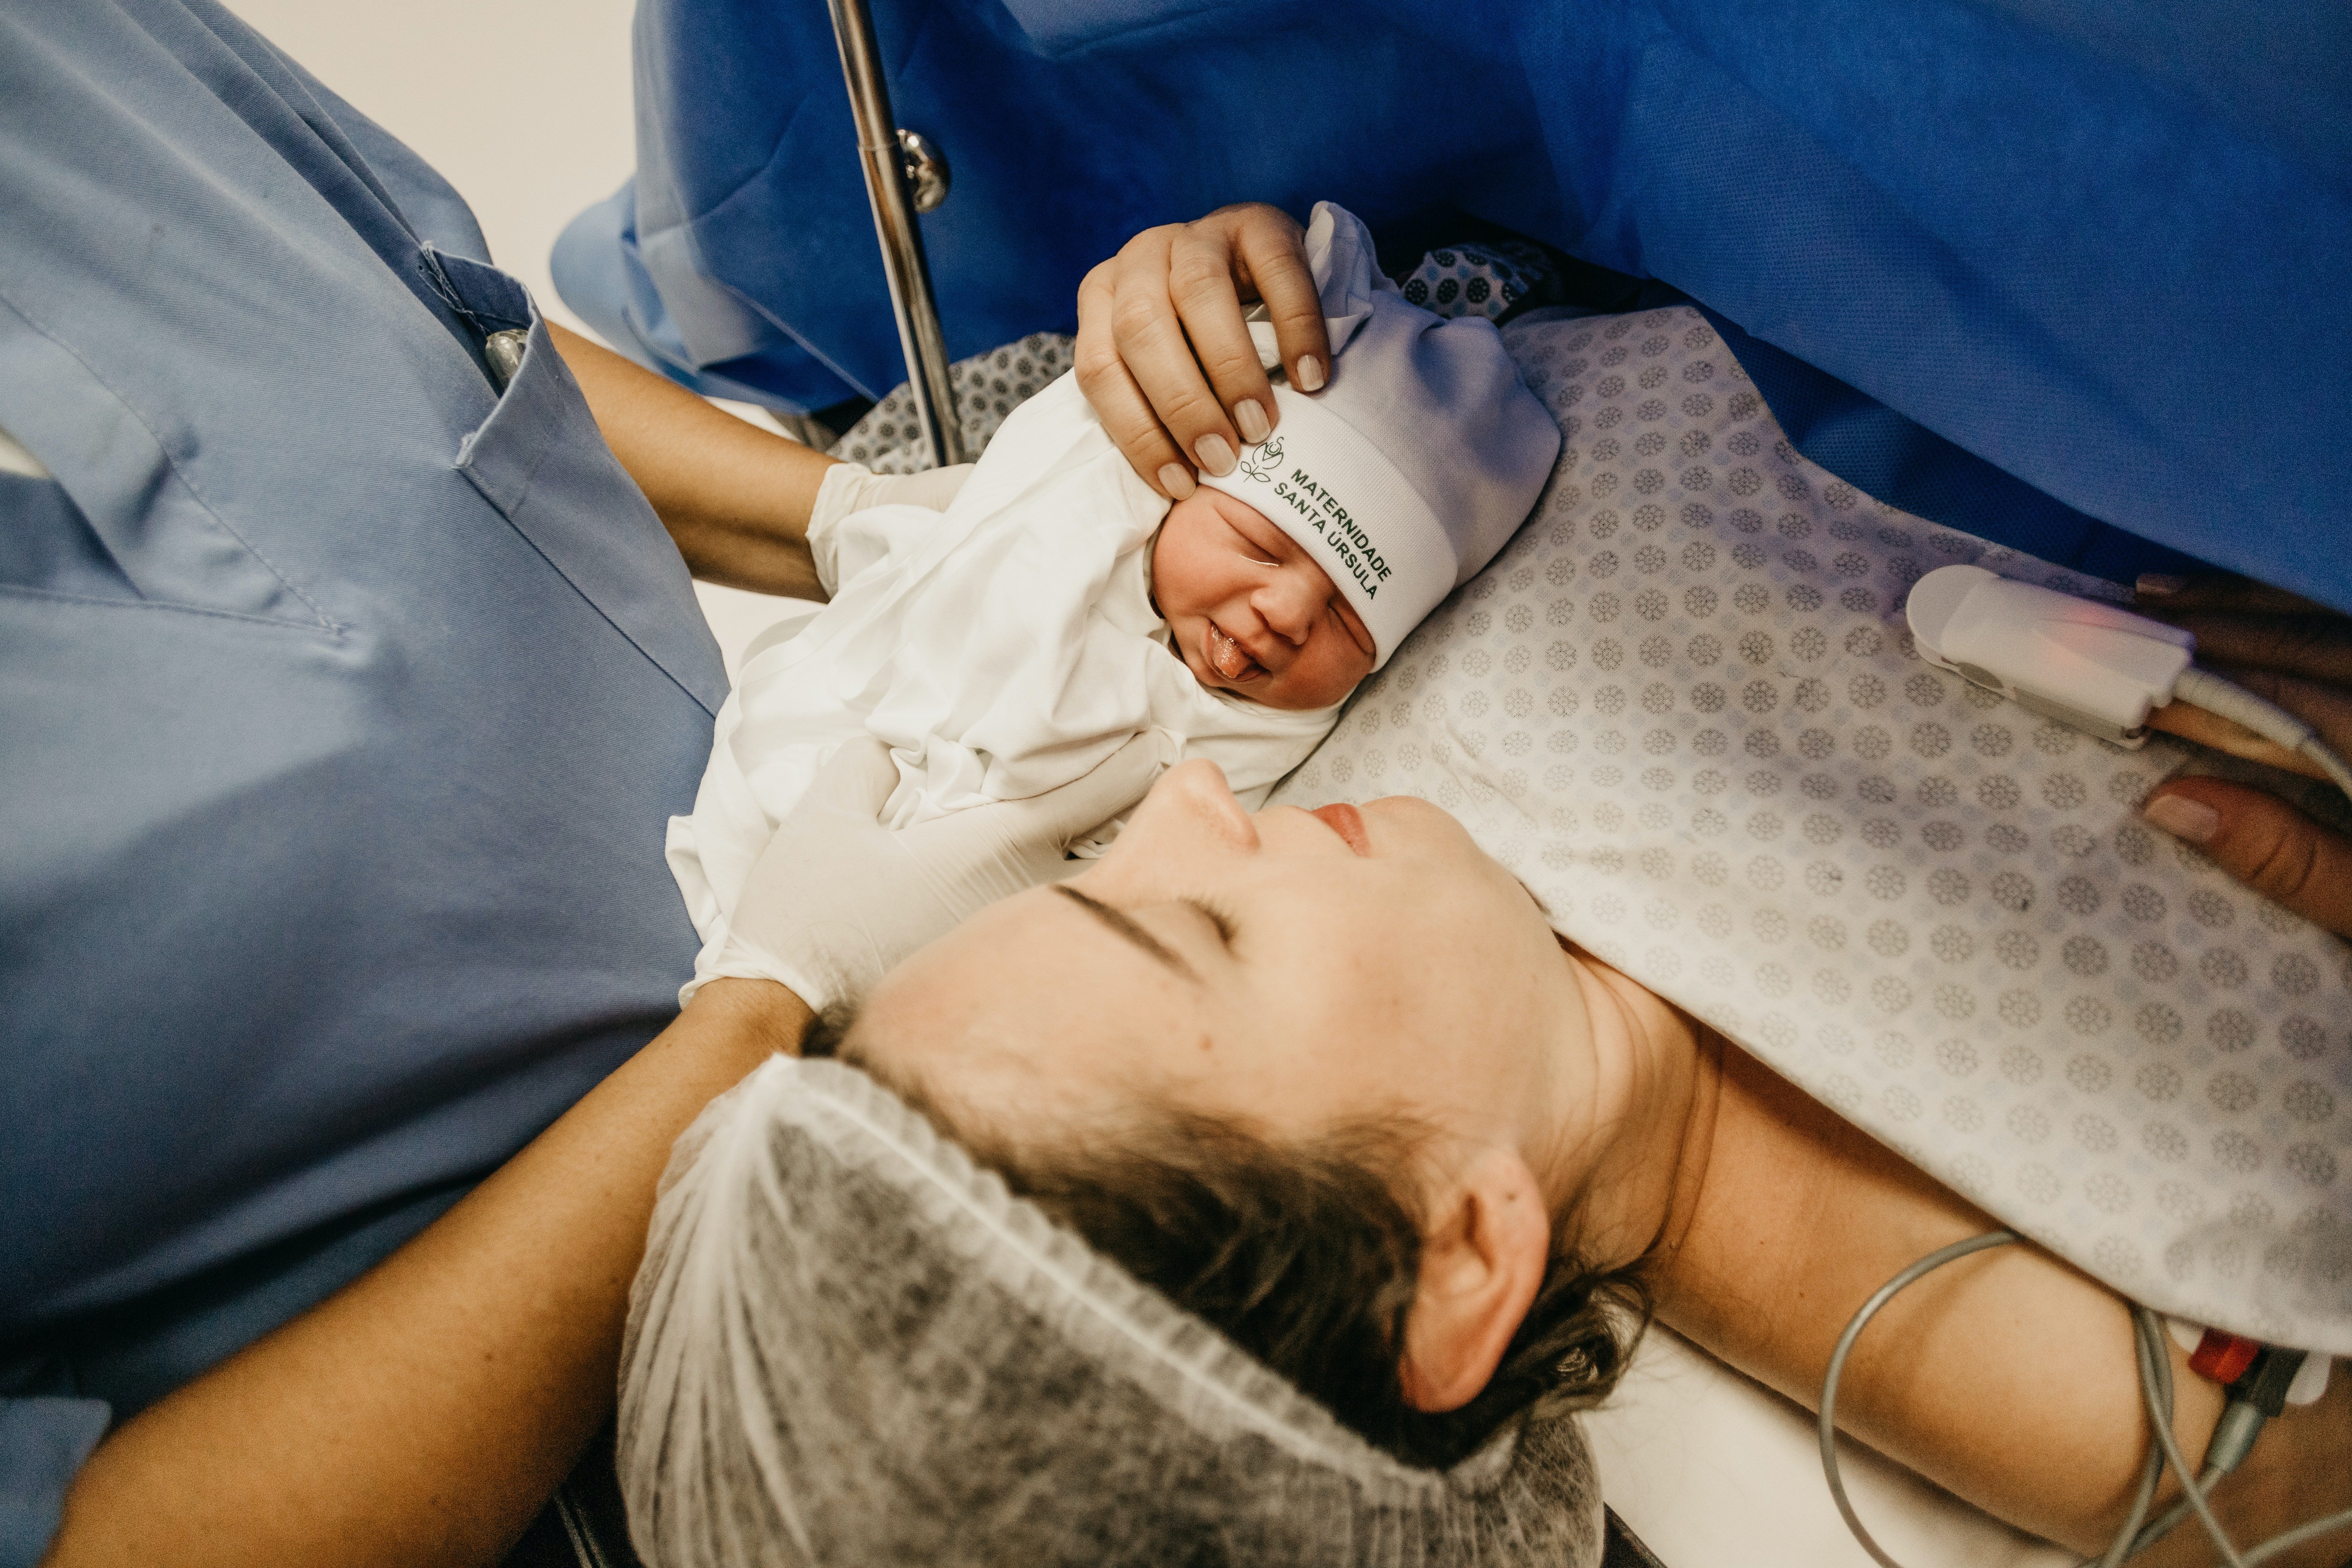 Woman with her newborn baby | Photo: Pexels